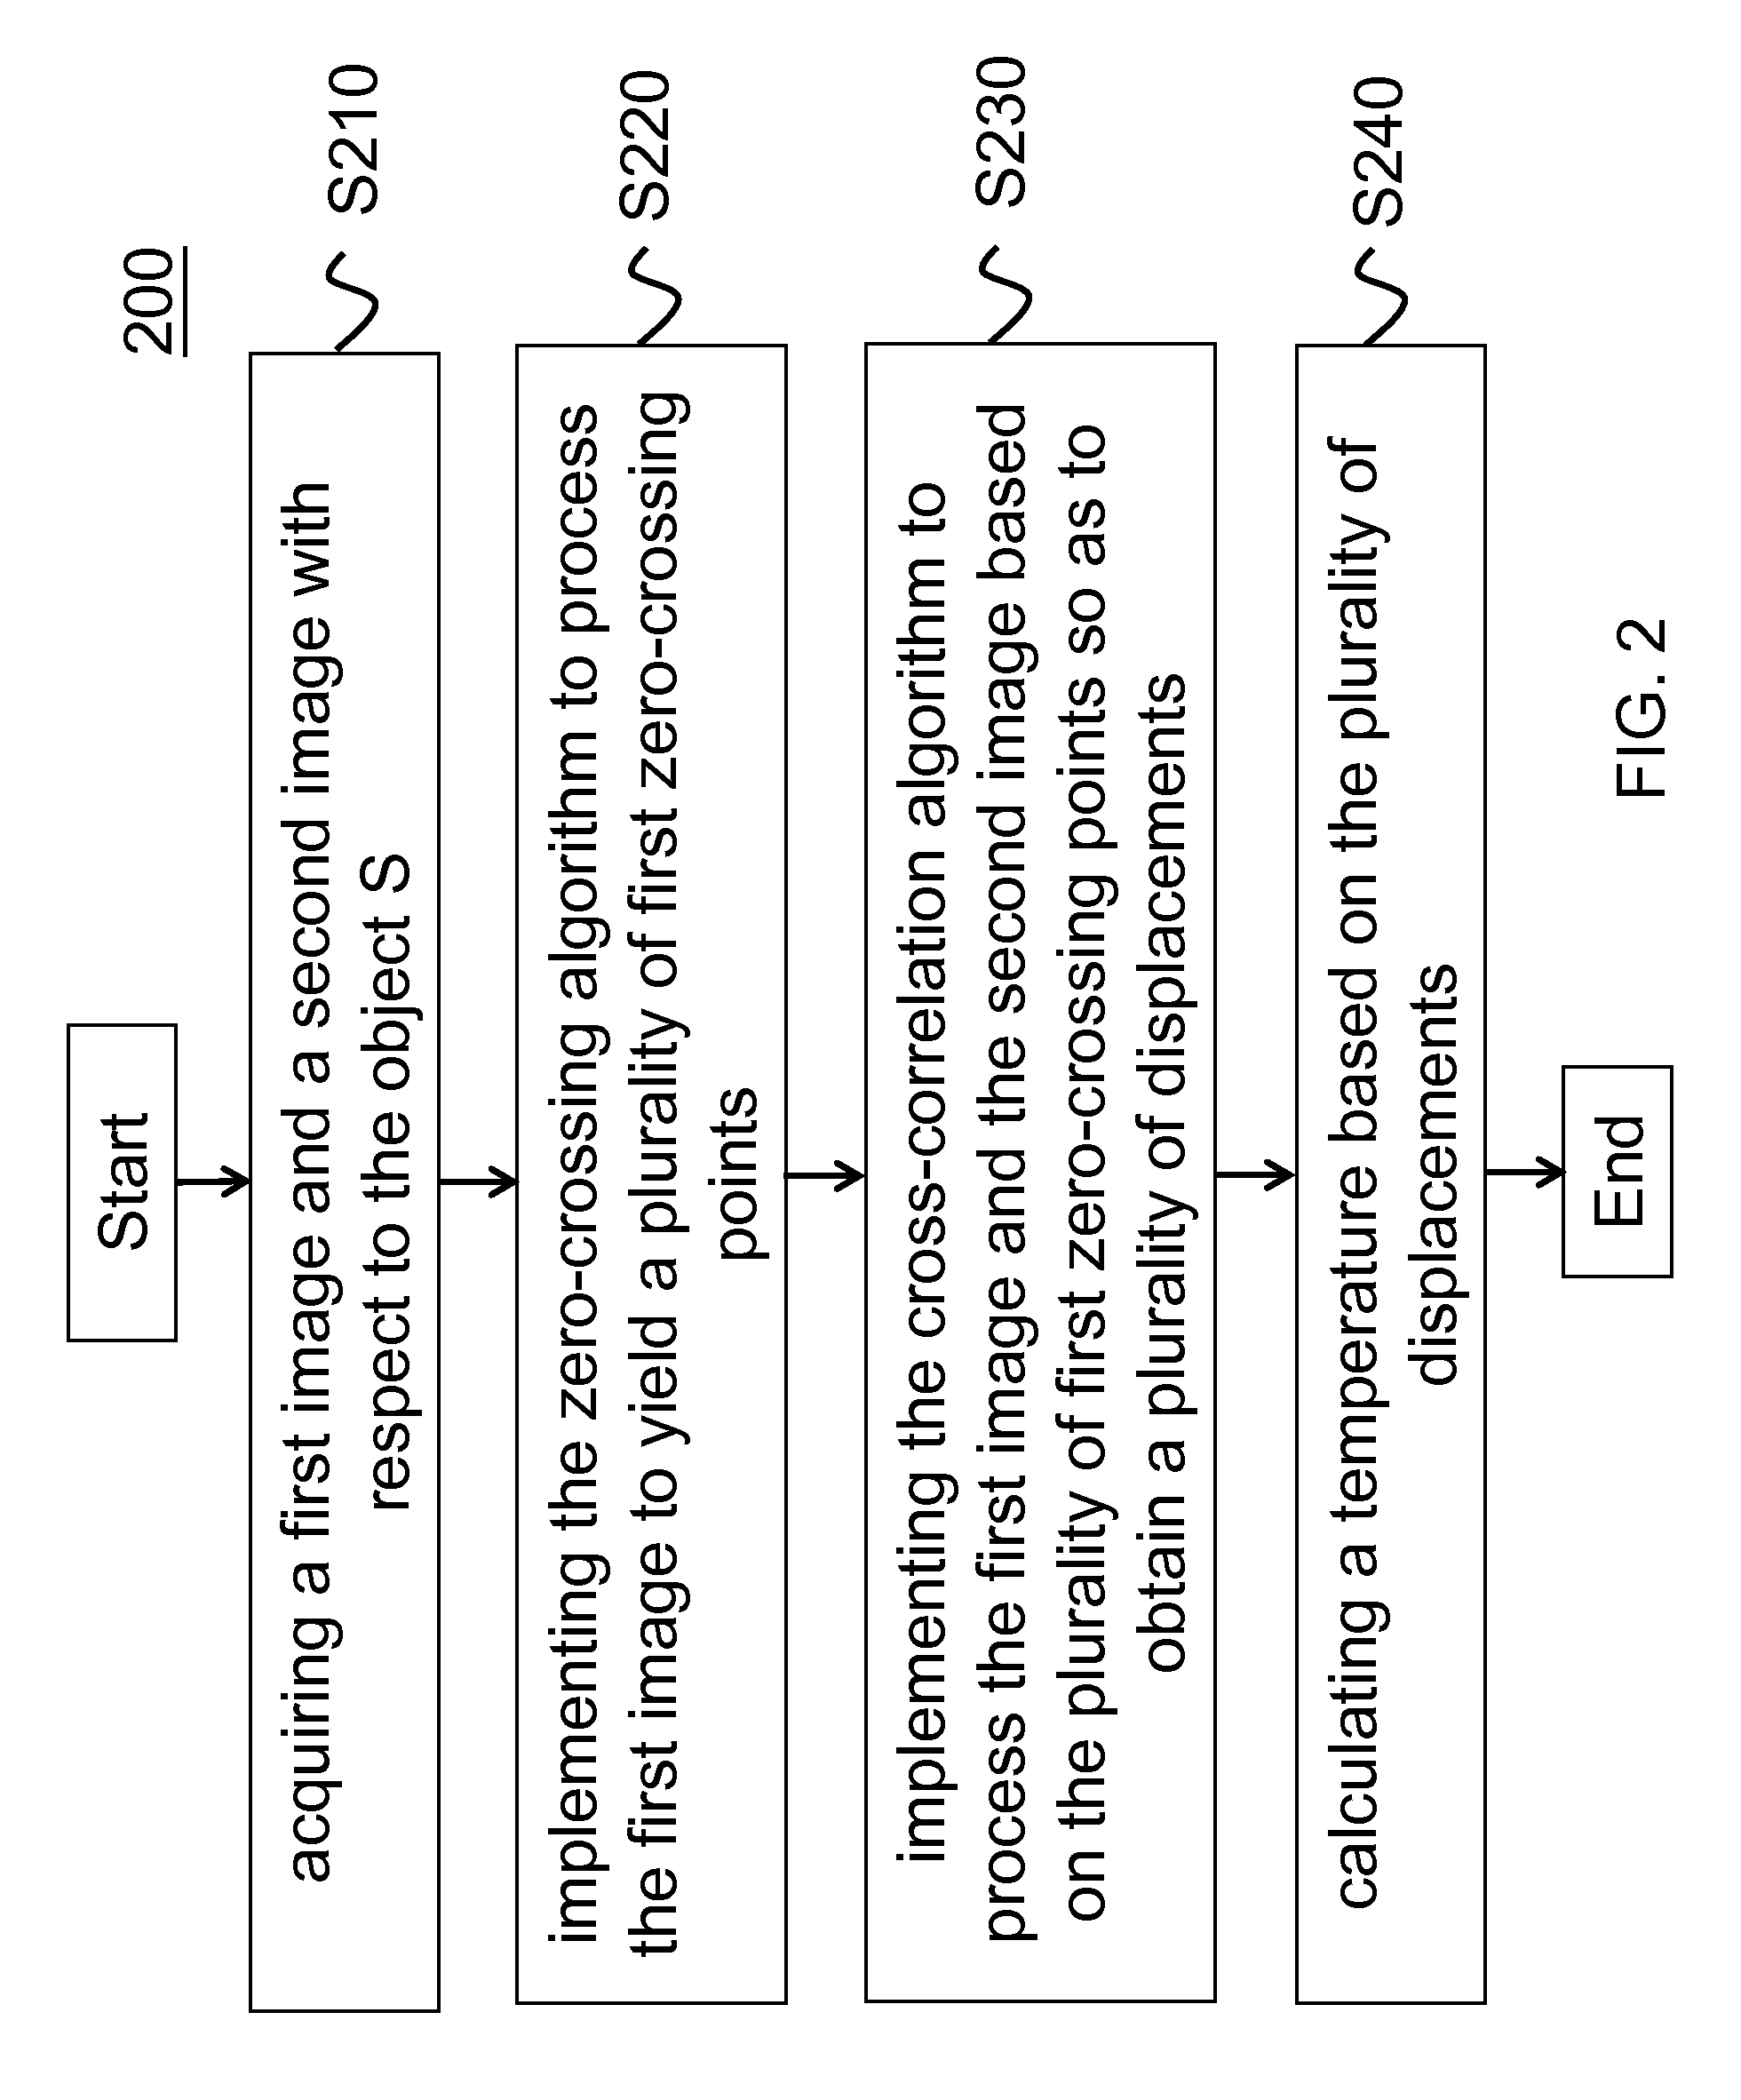 Ultrasound temperature mapping system and method